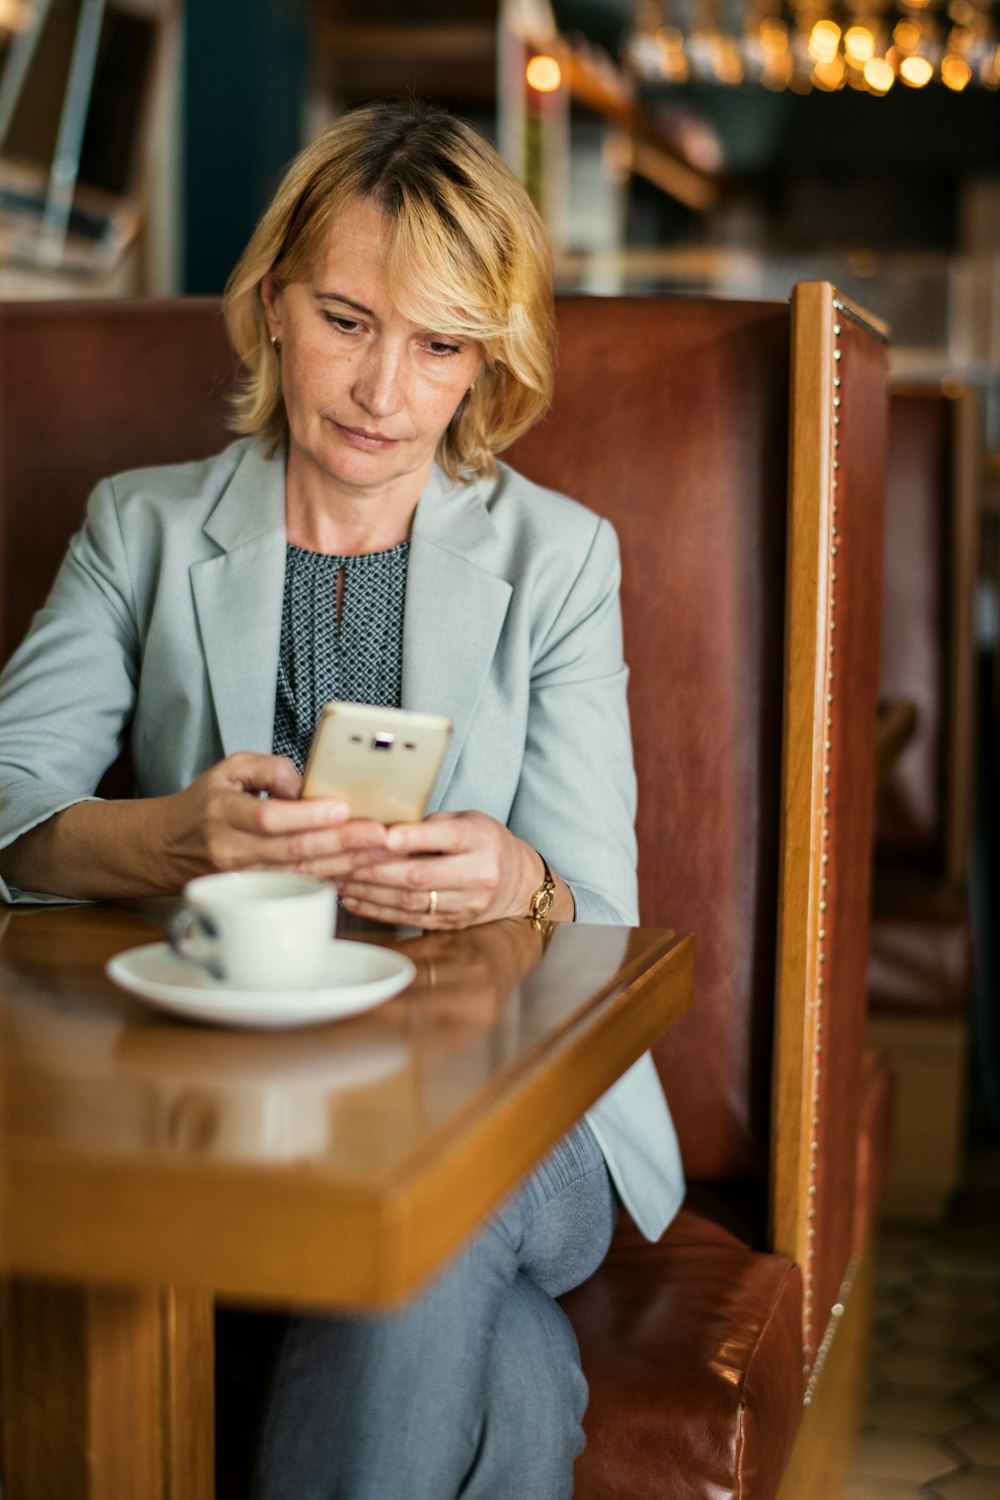 woman using white smartphone on front of table